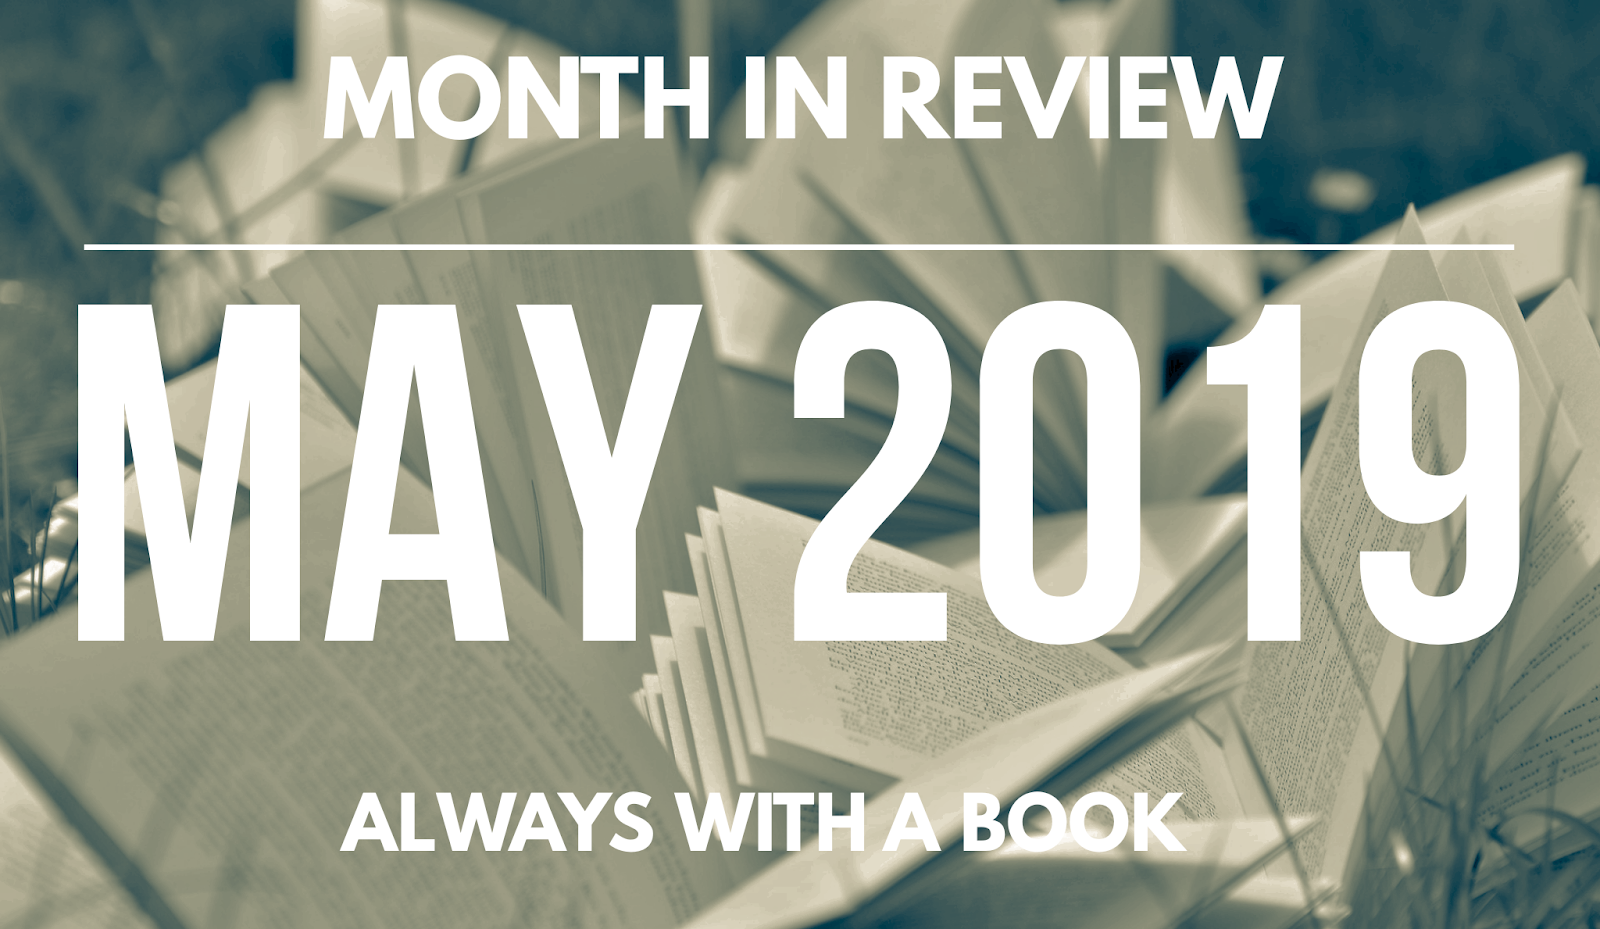 Month in Review: May 2019